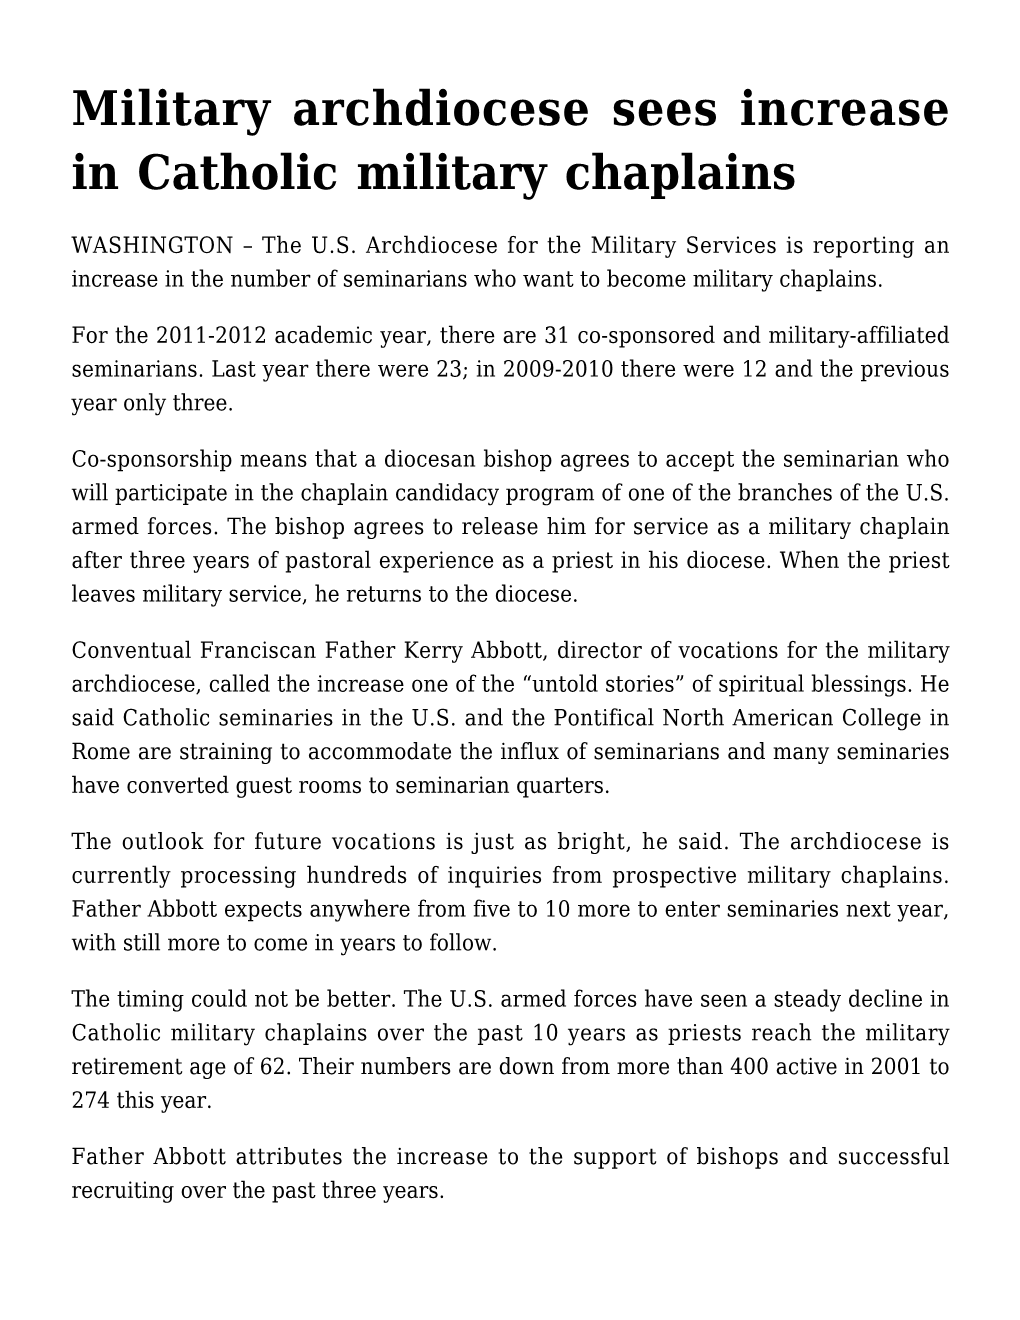 Military Archdiocese Sees Increase in Catholic Military Chaplains